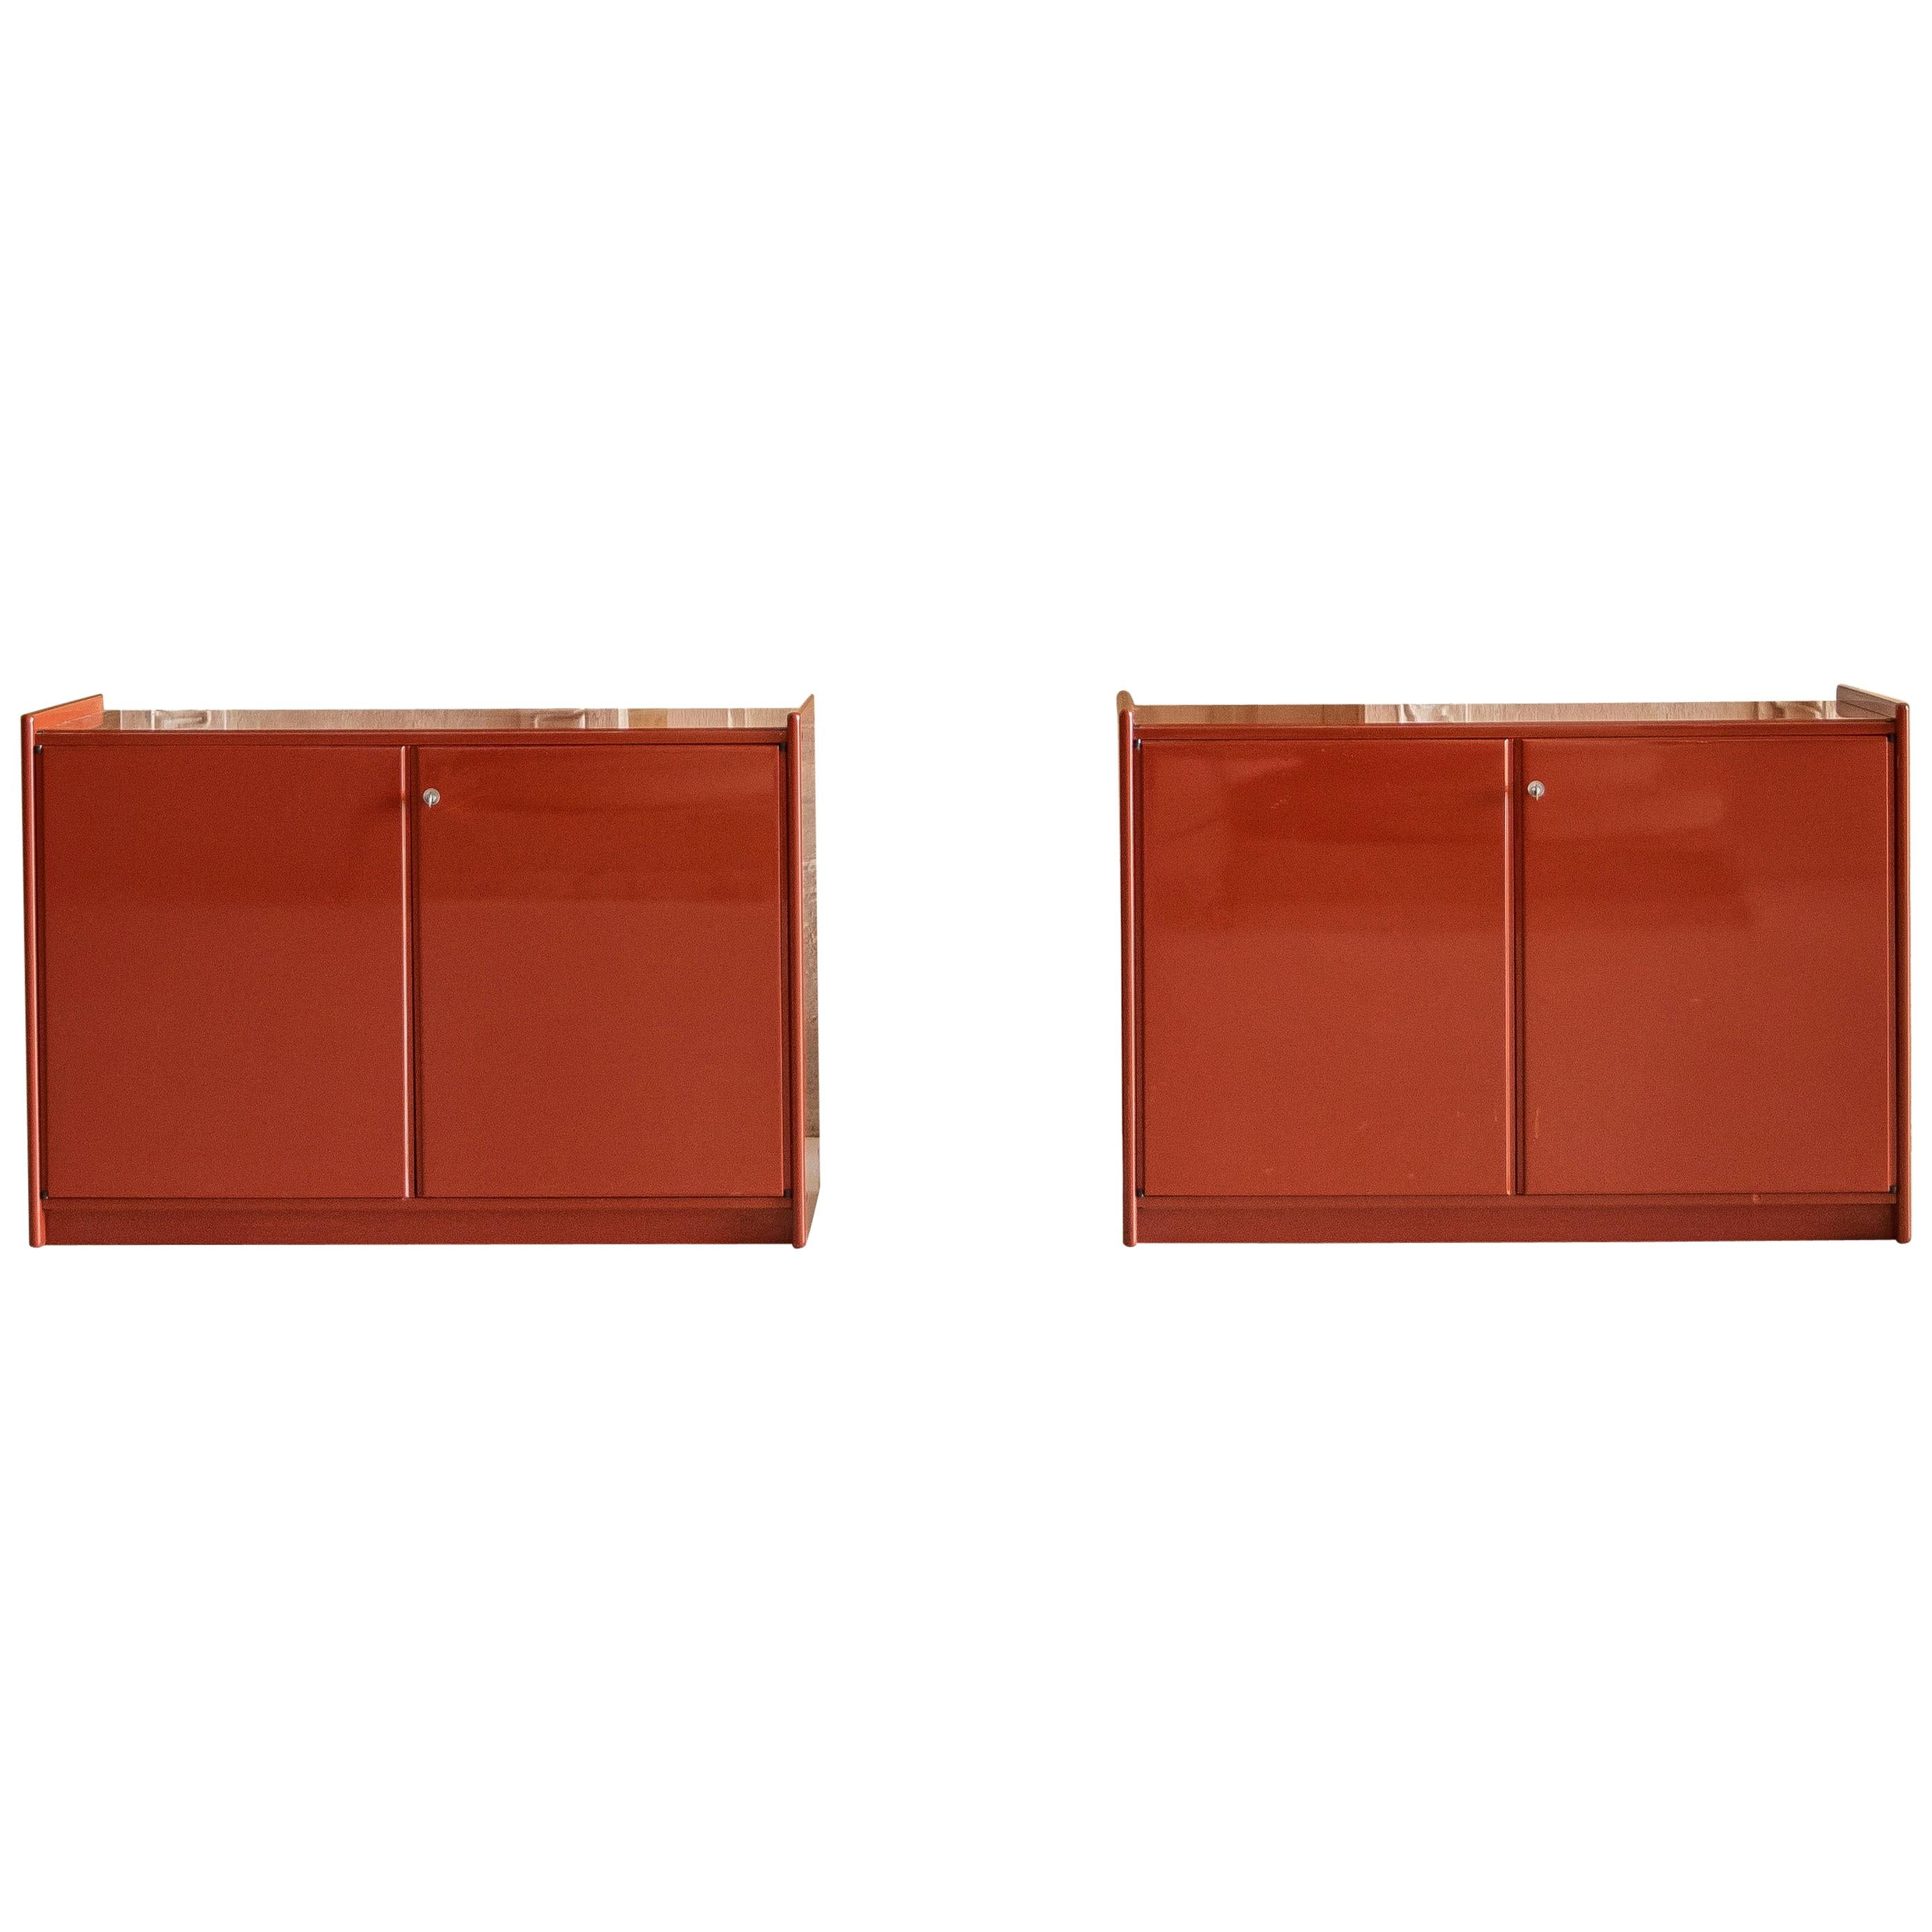 Pair of Lacquered Cabinets Attributed to Dino Gavina